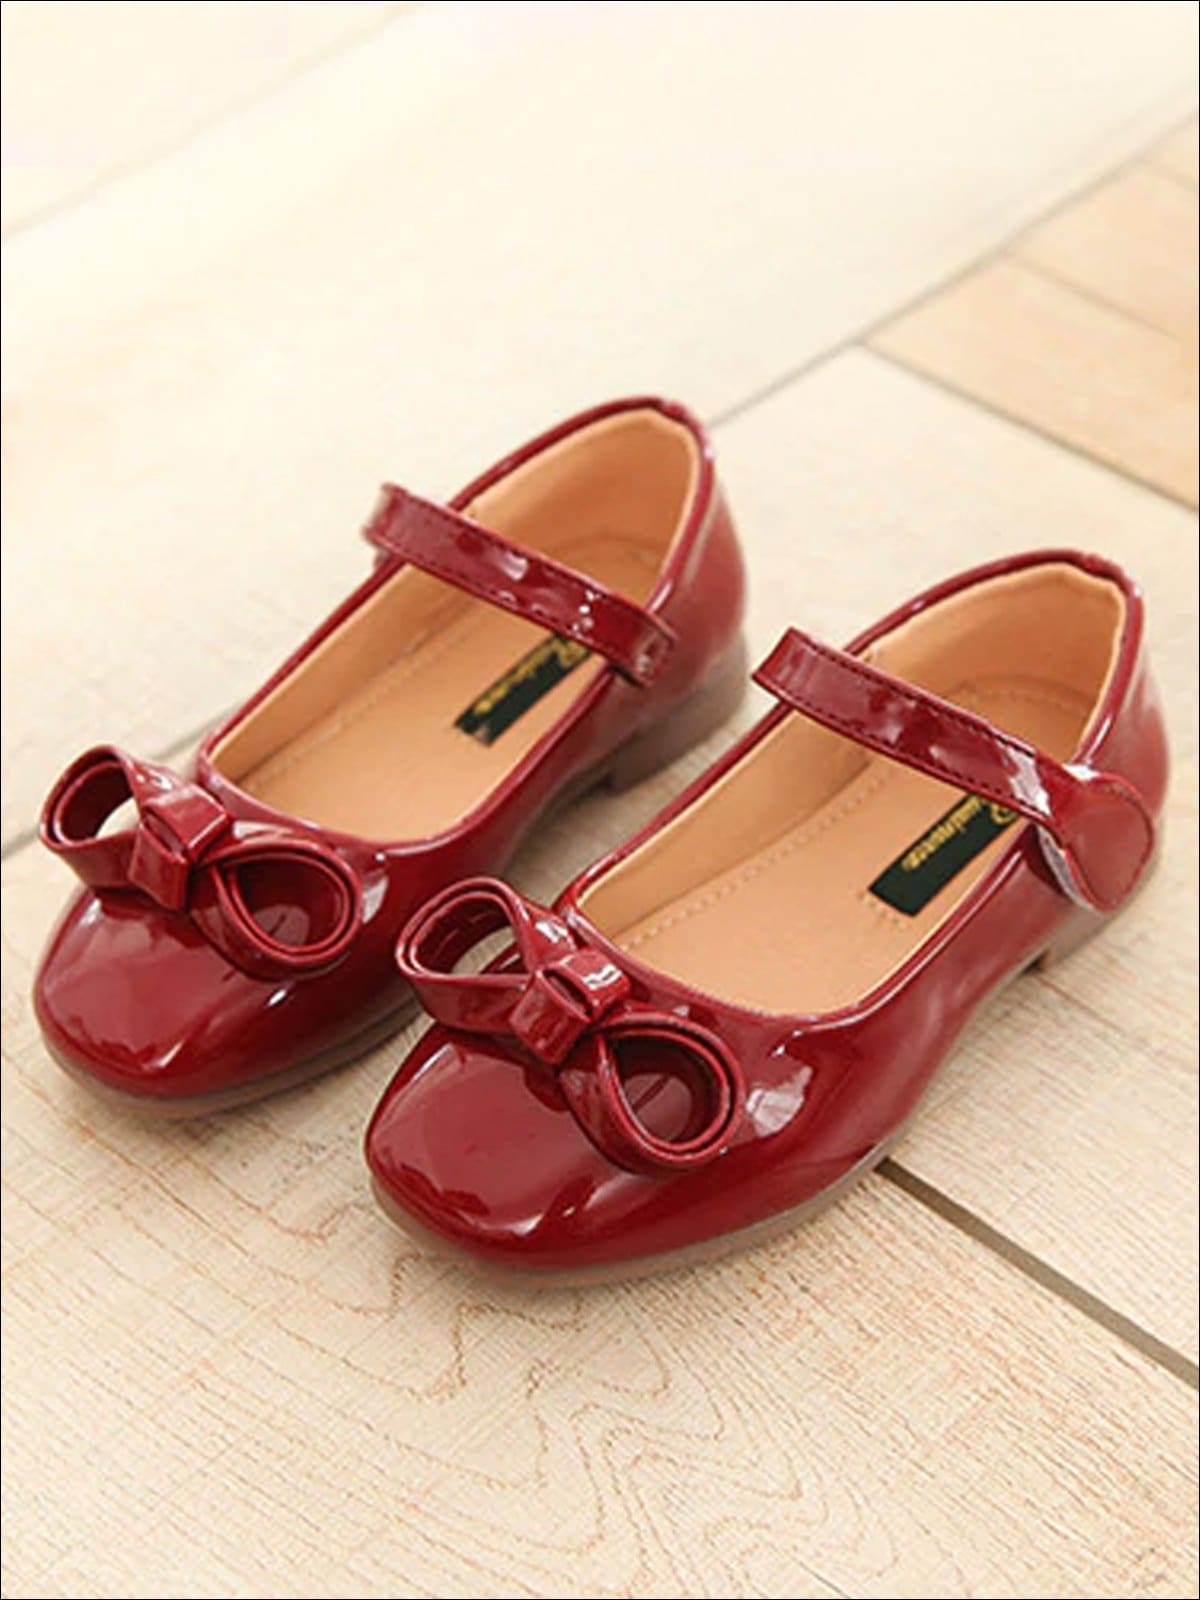 Girls Leather Flats with Bow (3 Color Options) - Red / 1 - Girls Flats